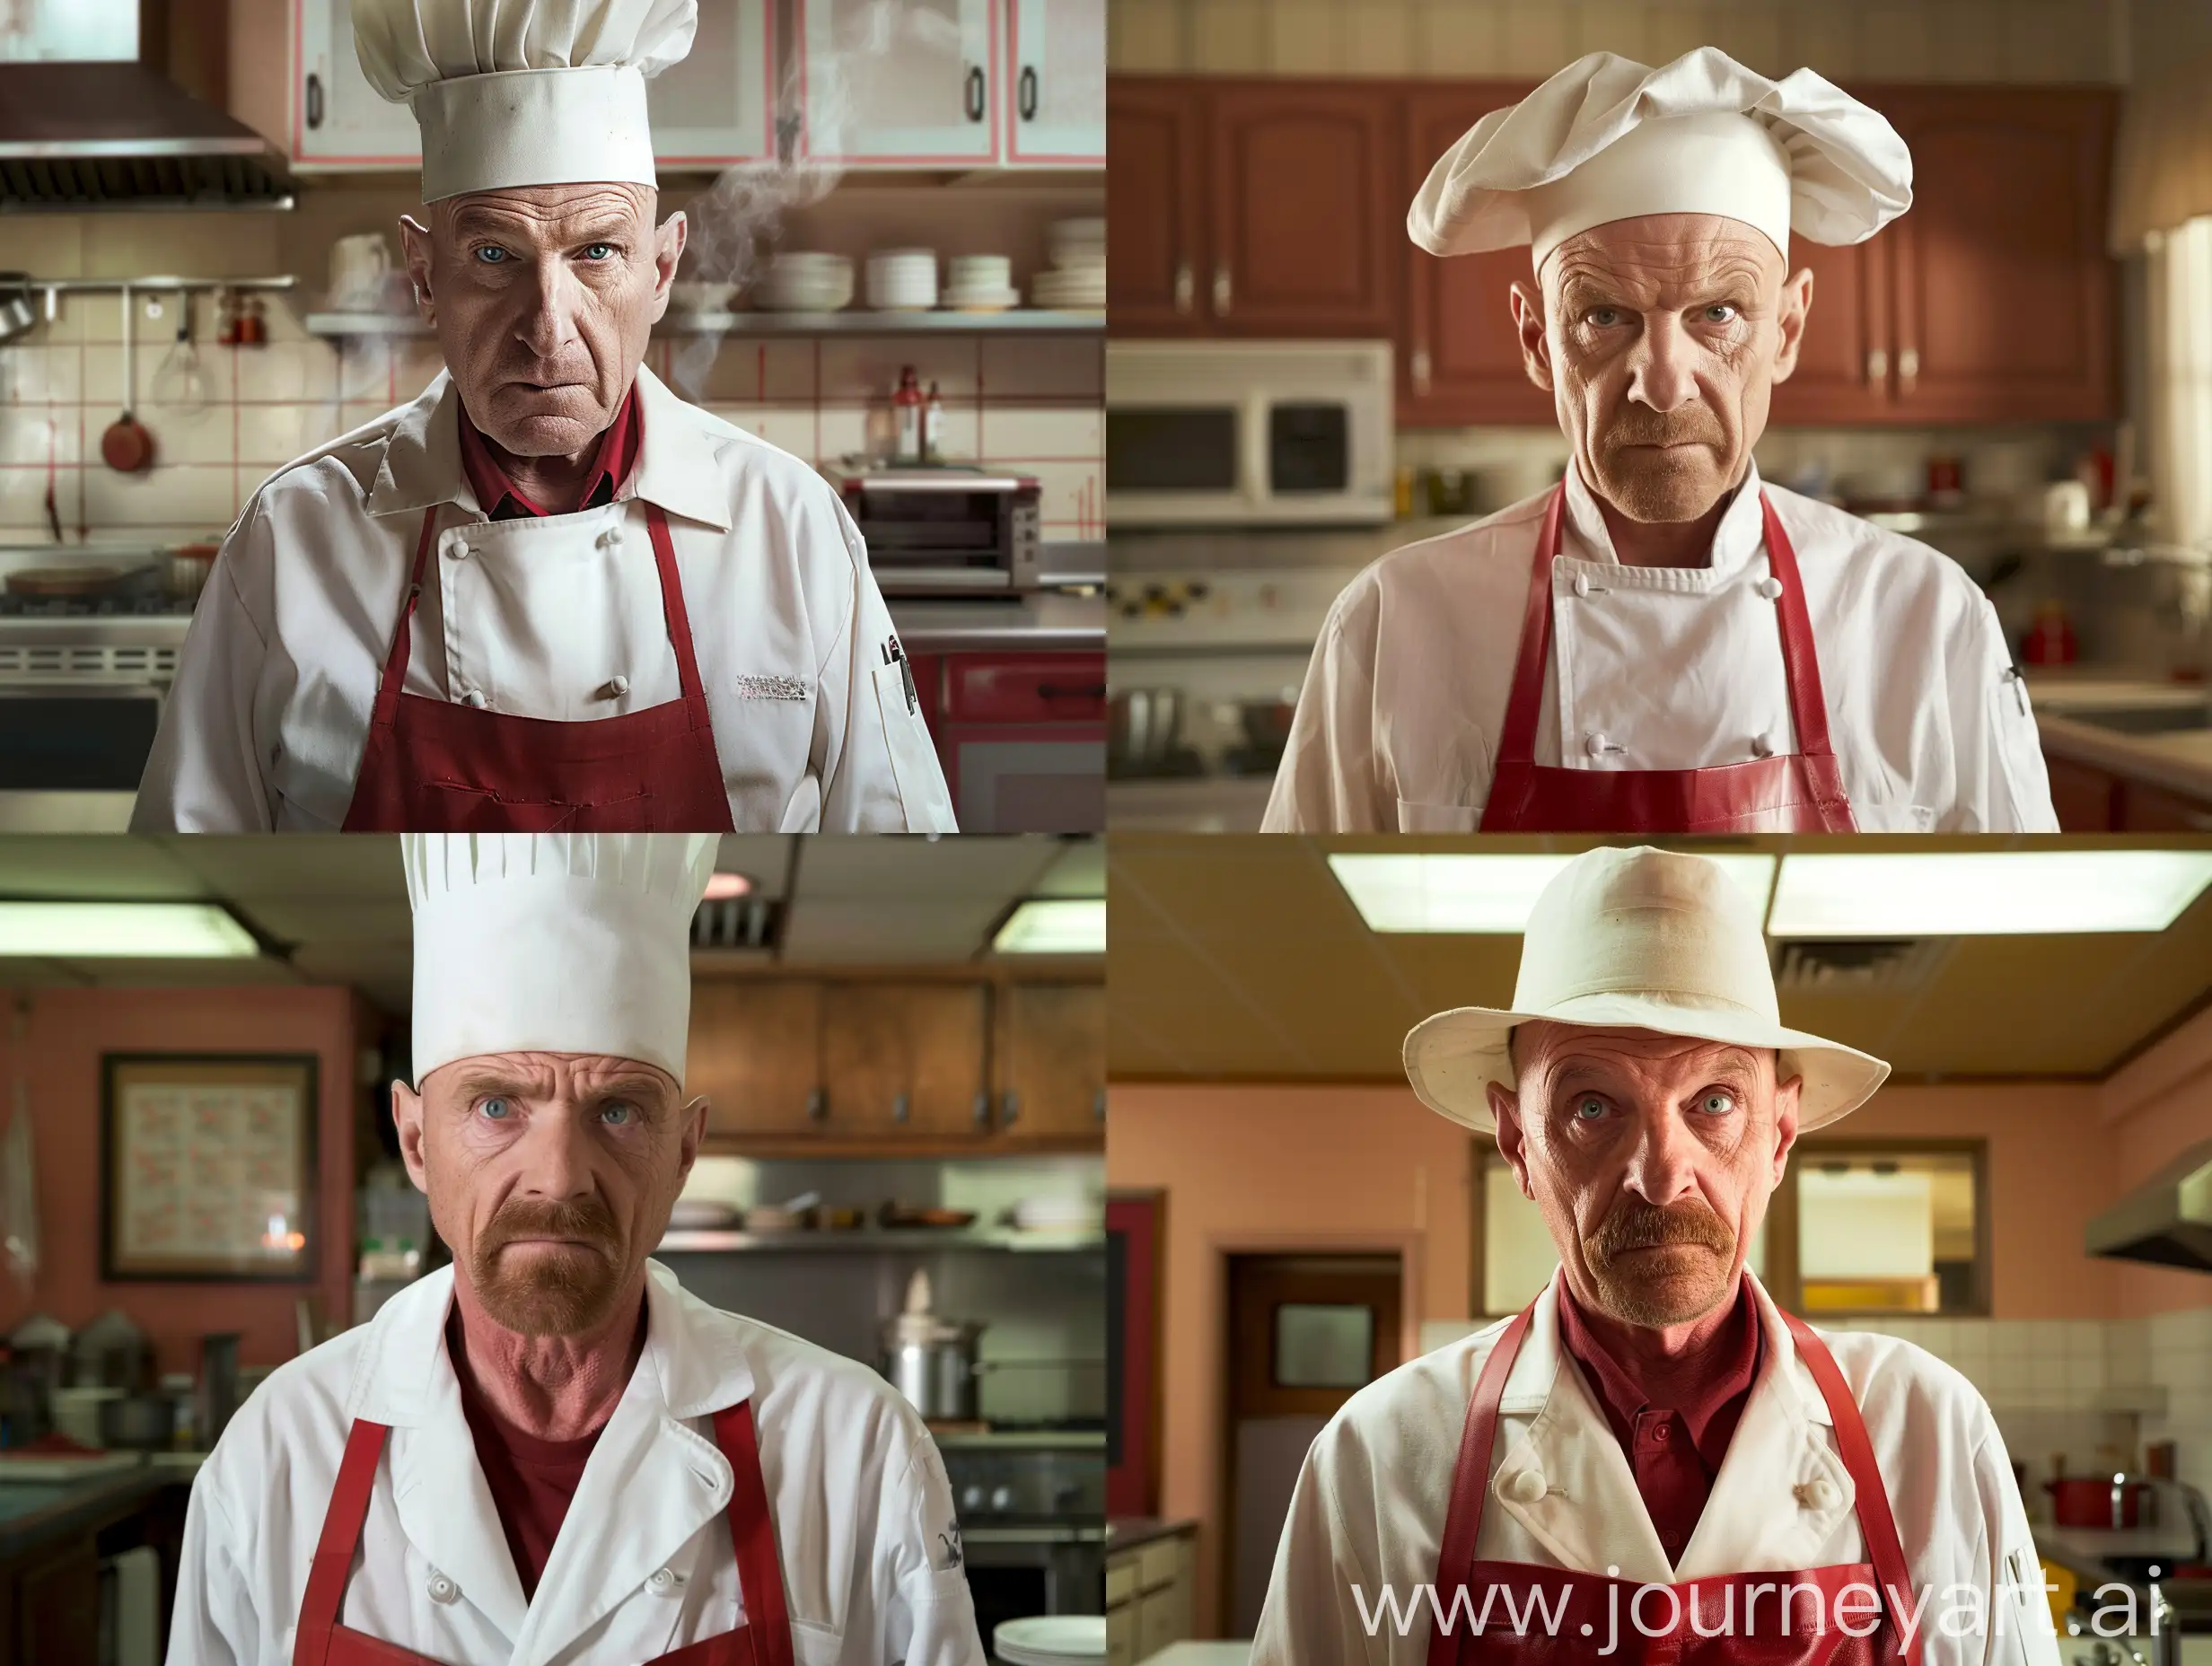 Mike-Armantrat-in-Breaking-Bad-Intense-Chef-Portrait-in-Kitchen-Setting